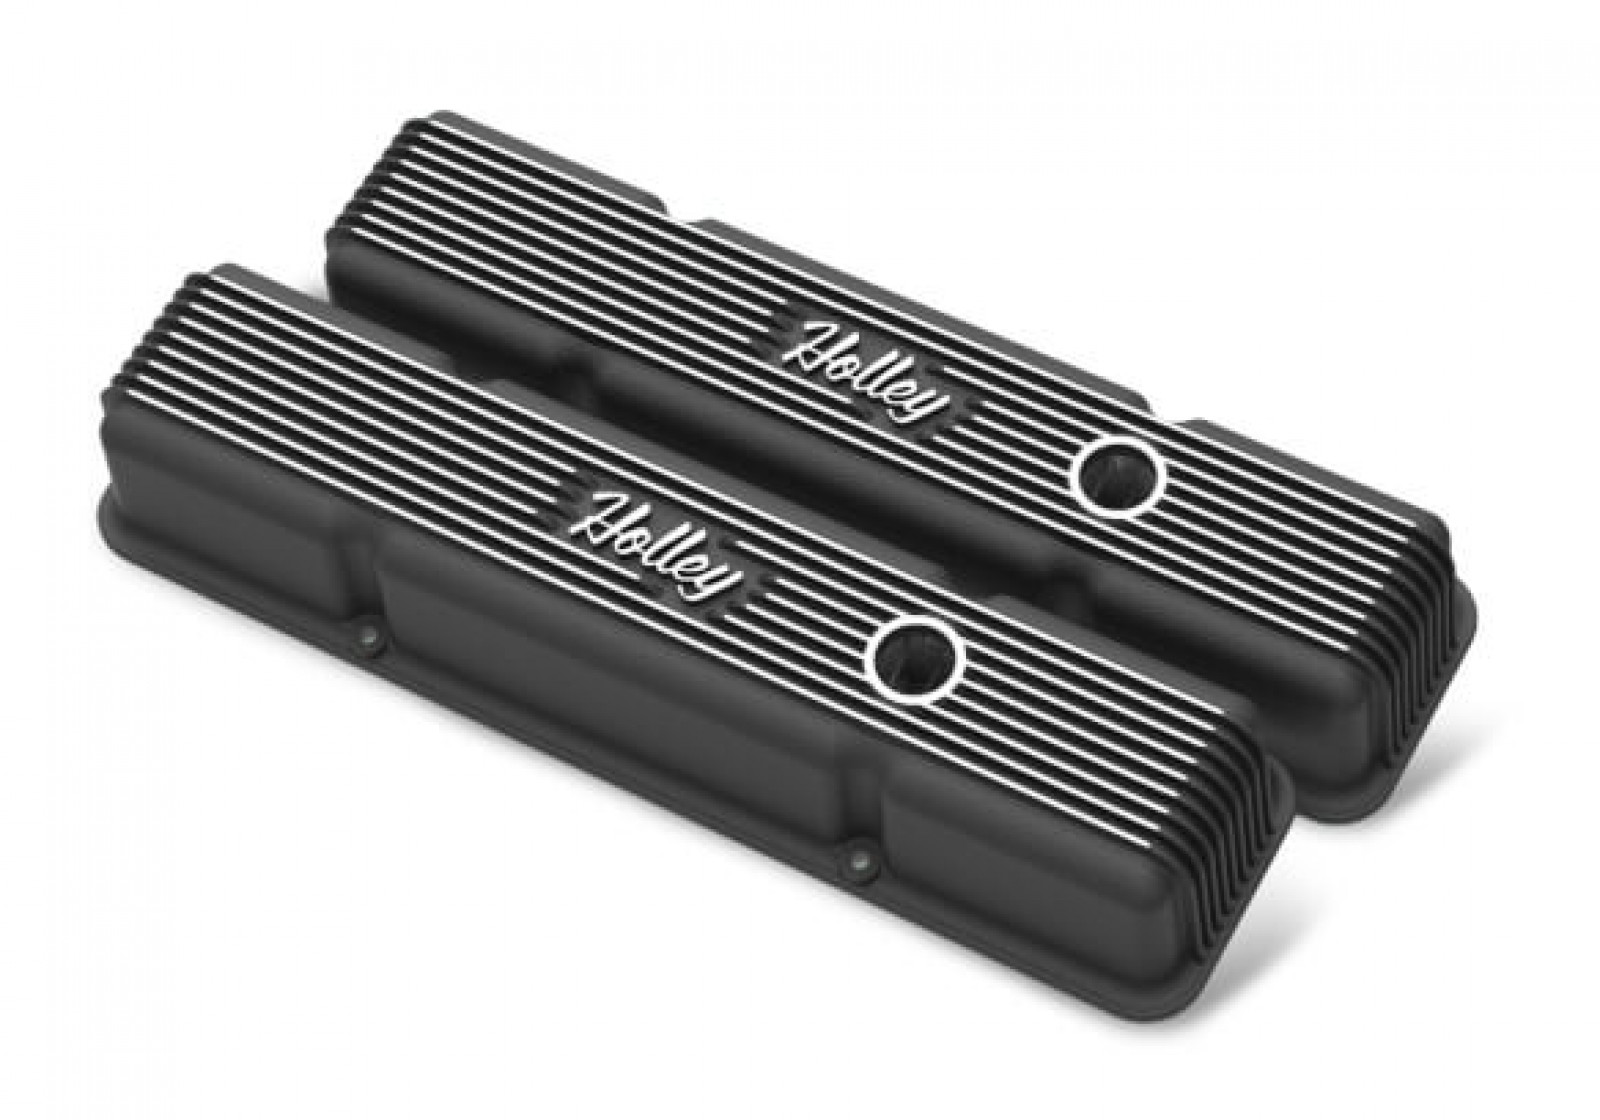 Buy Holley Valve Covers Vintage Series Finned SBC Satin Black  Machined 241-242 for 180.99 at Armageddon Turbo  Performance